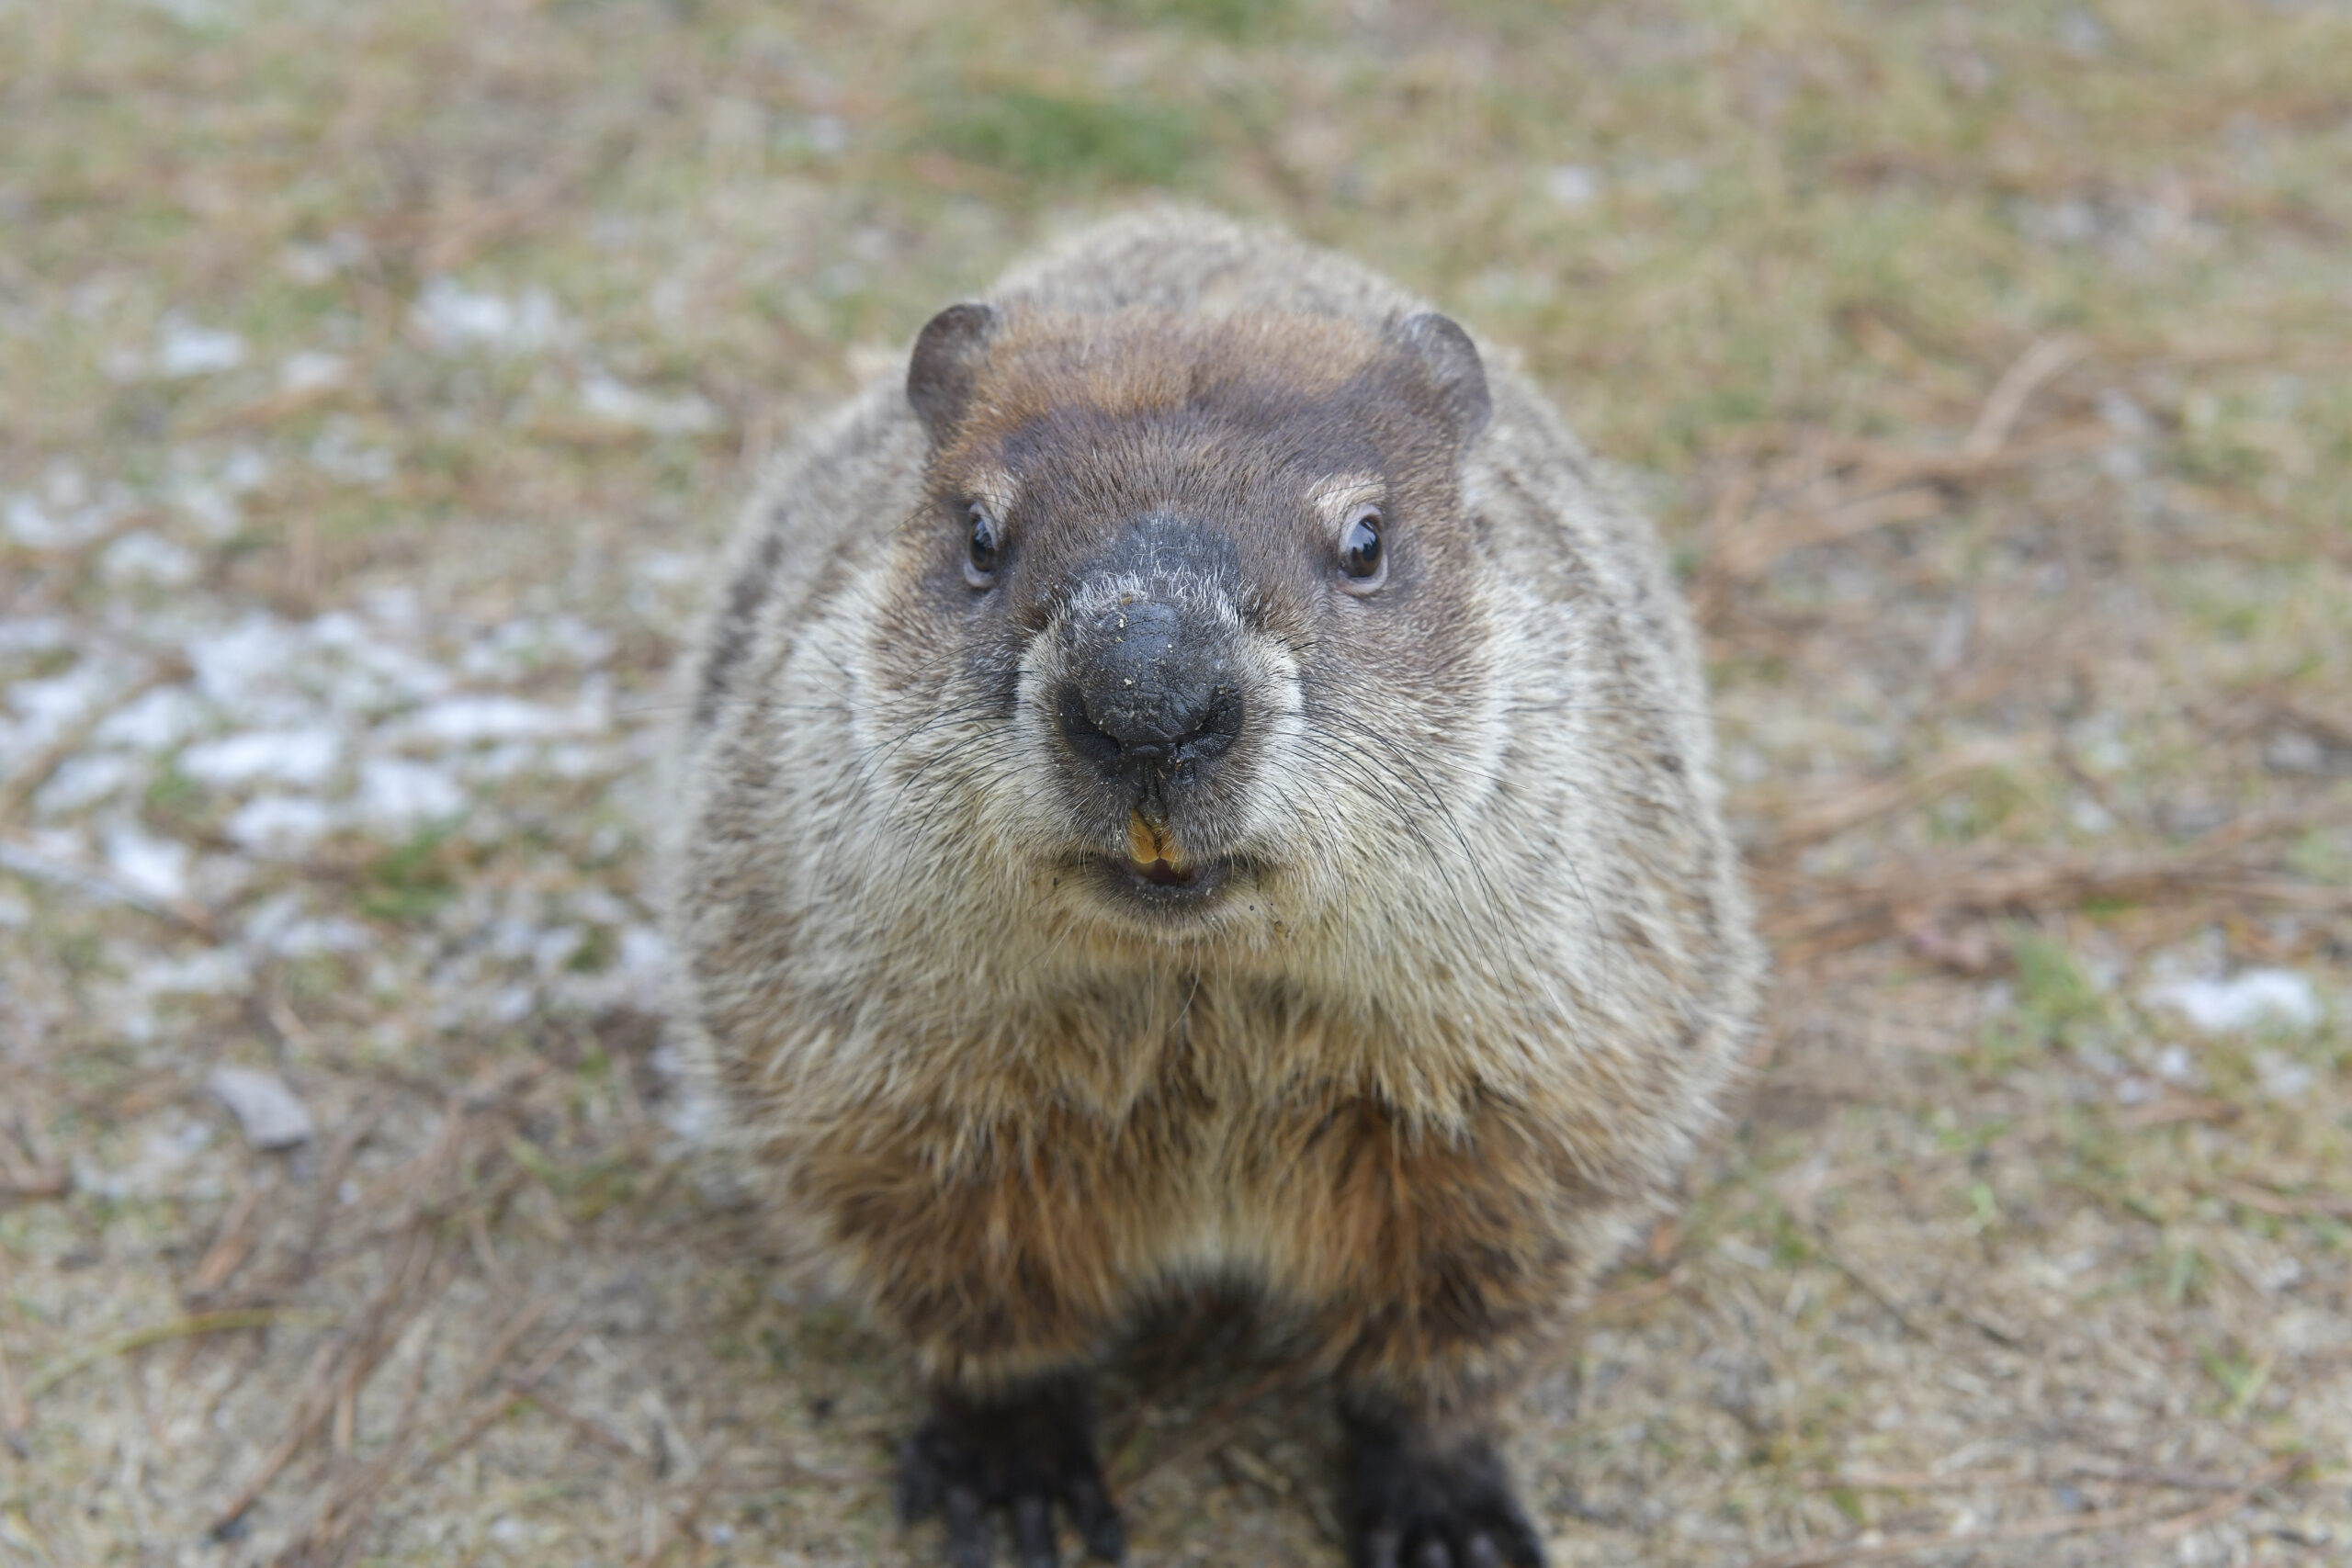 Allen McButterpants makes his debut as a prognosticator on Groundhog  Day at the Evelyn Alexander Wildlife Rescue Center. Allen did not see his shadow and predicted an early spring.  DANA SHAW